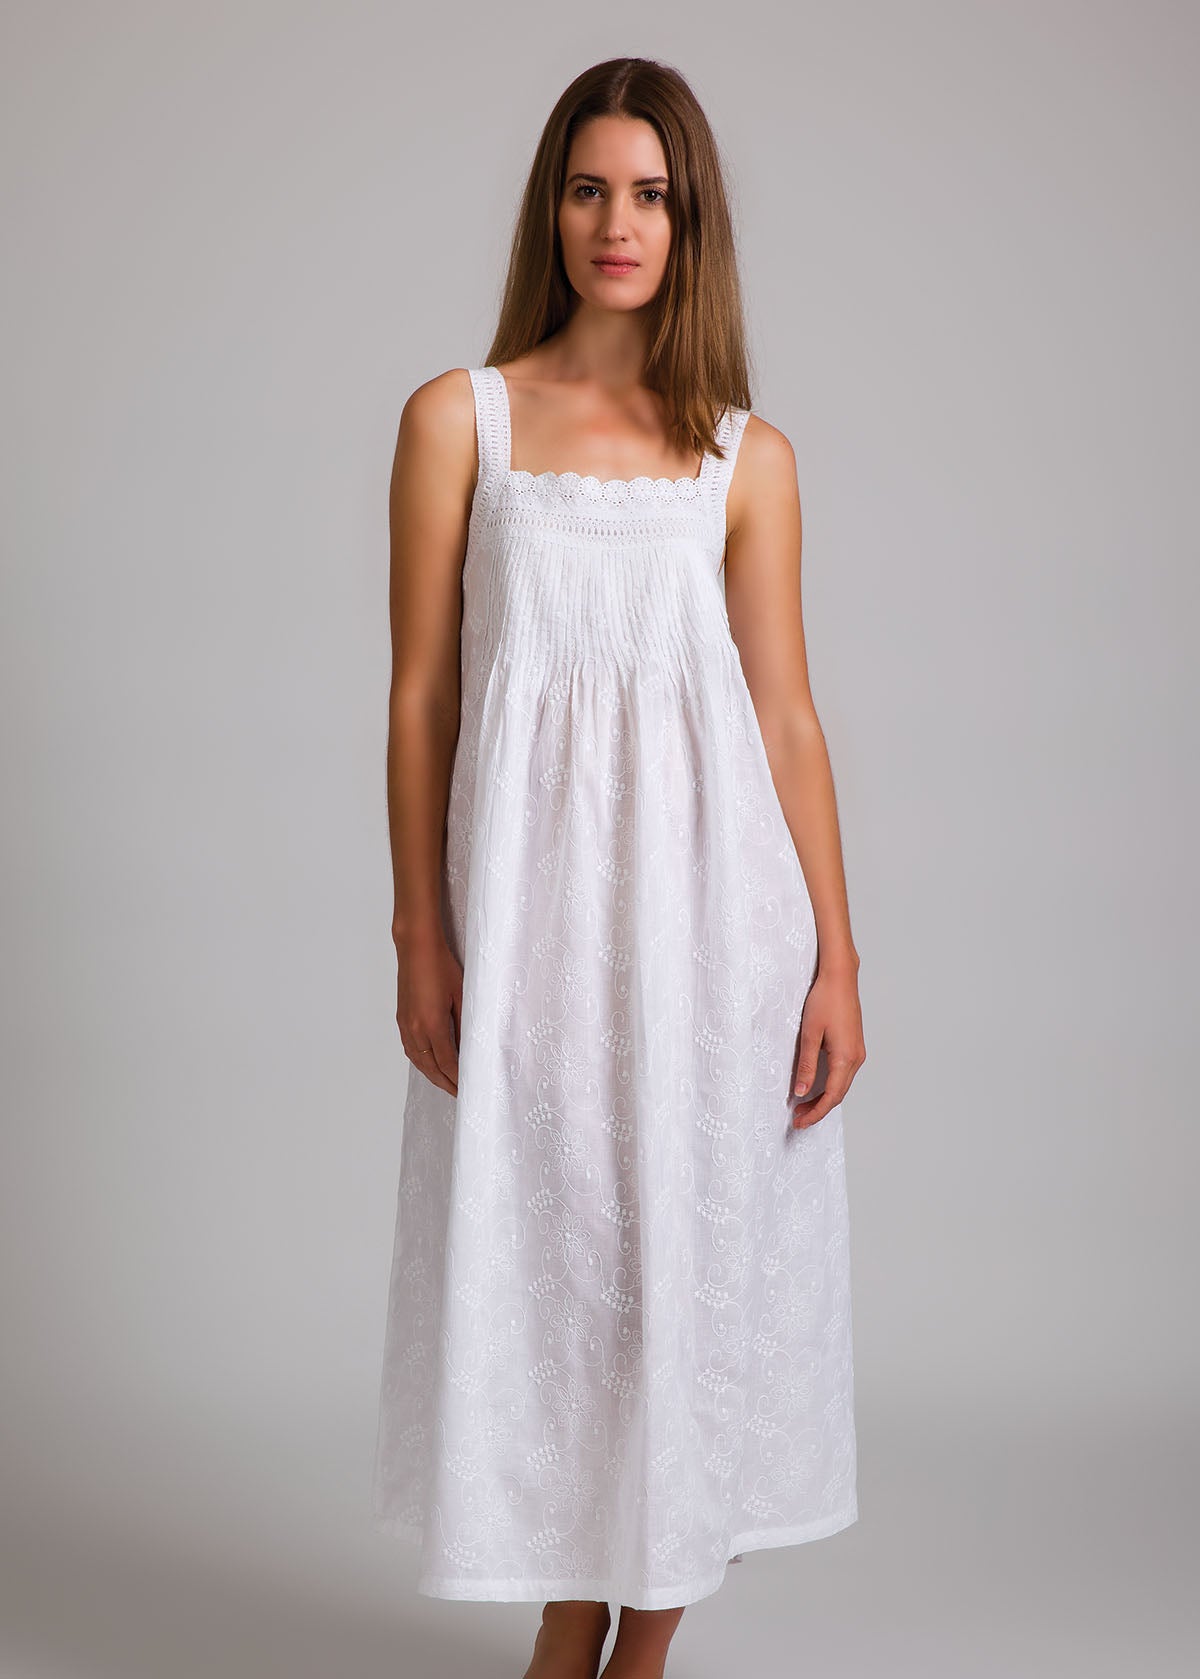 White Pin Tucked Lace Nightie with Embroidery